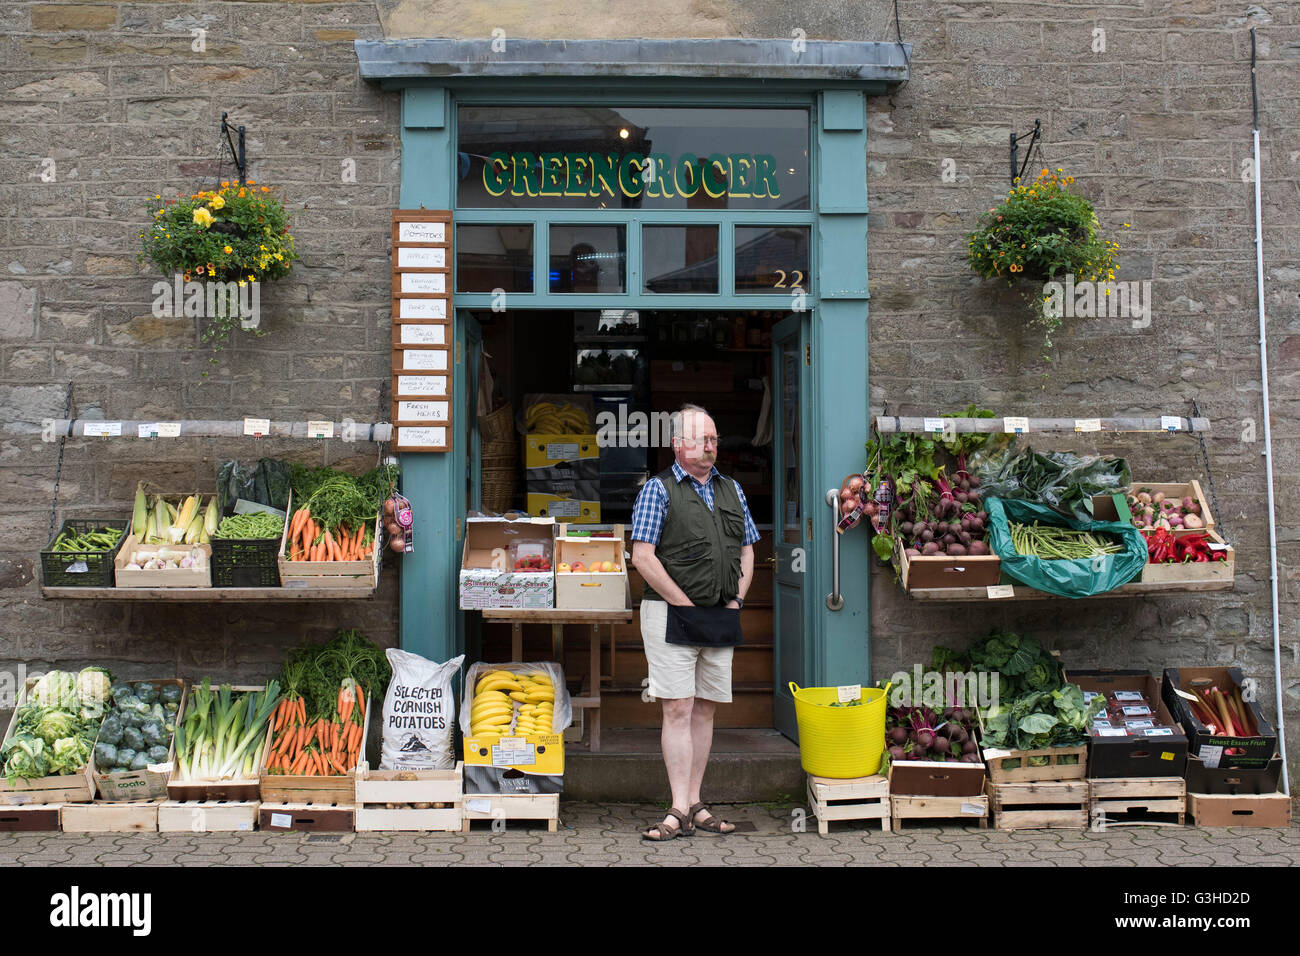 A traditional greengrocer selling healthy fruit and vegetables on the street in Hay-on-Wye, Wales. Stock Photo